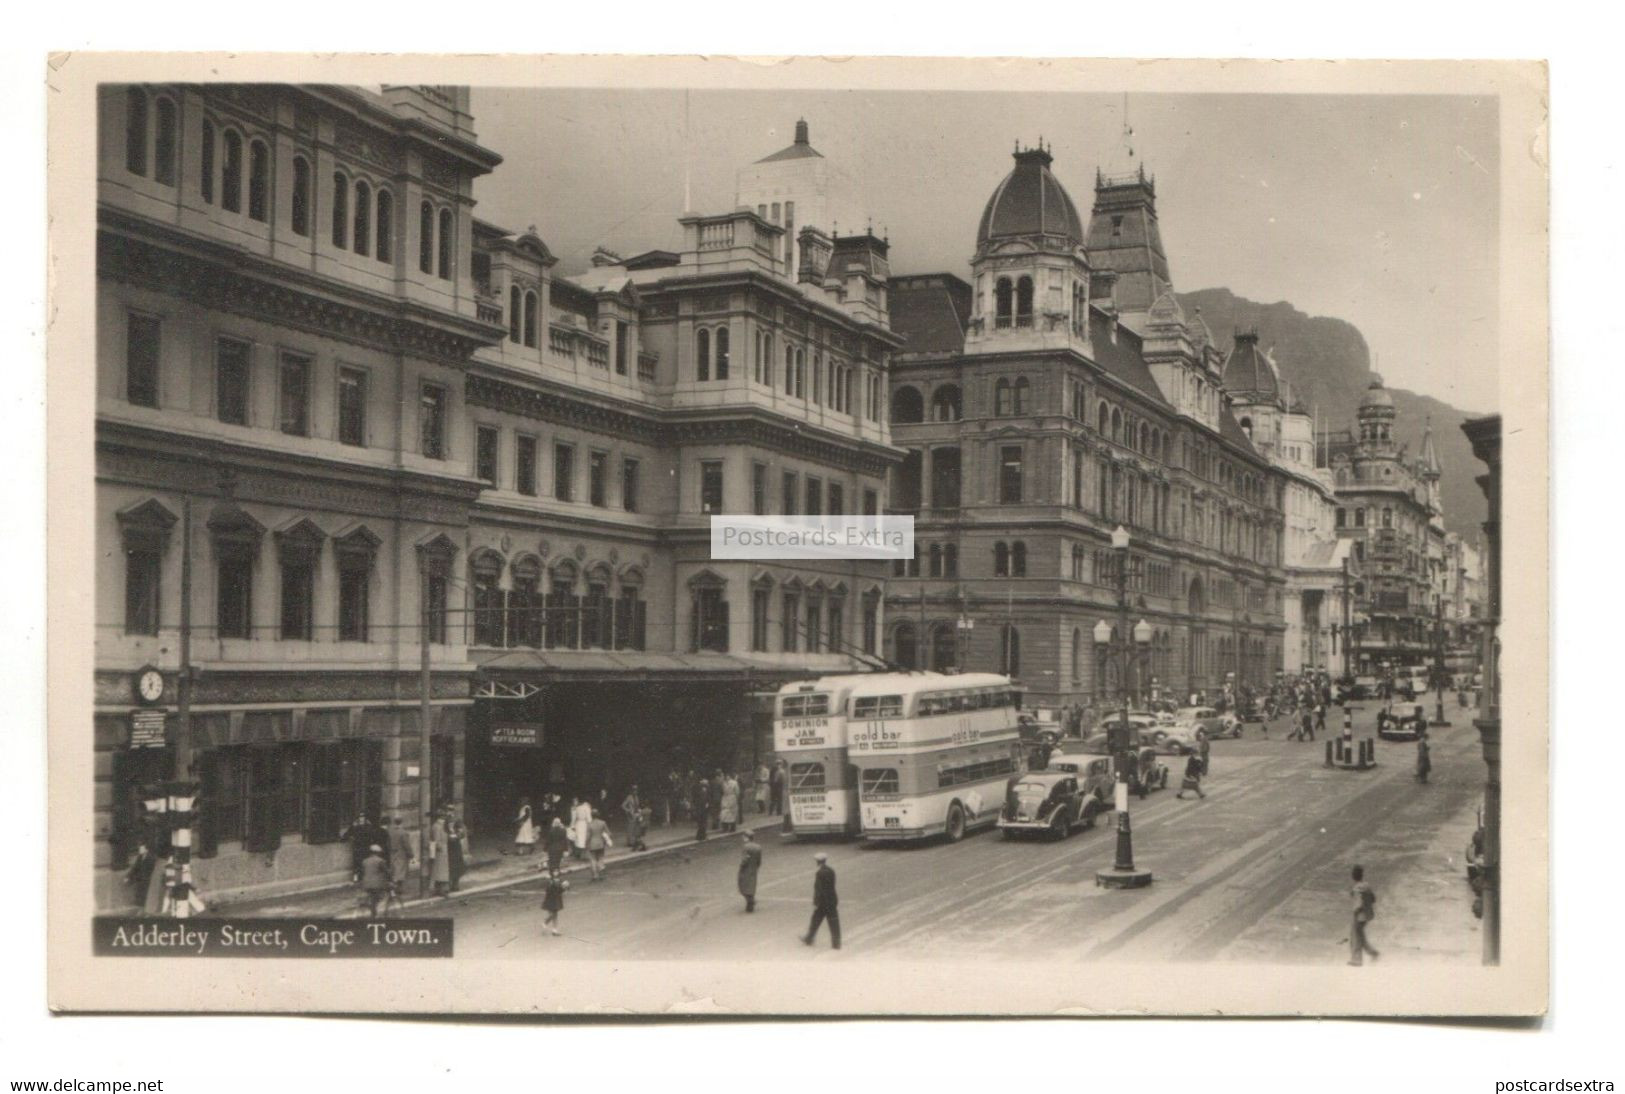 Cape Town - Adderley Street, Double-decker Trolley Bus, Vintage Cars - Old South Africa Real Photo Postcard - South Africa